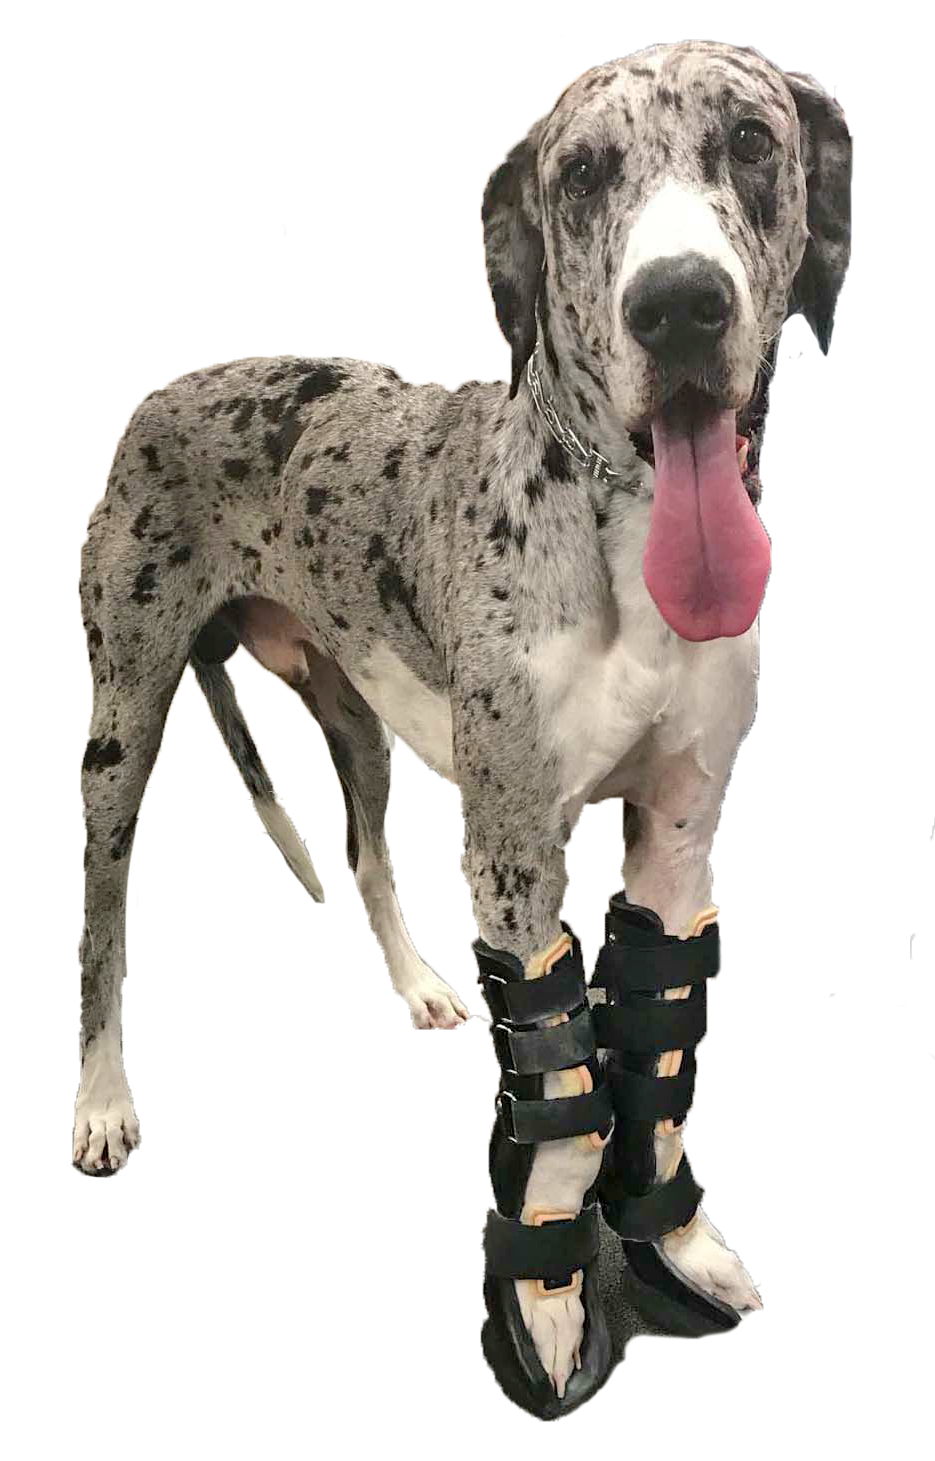 A large dog wearing two front carpal braces